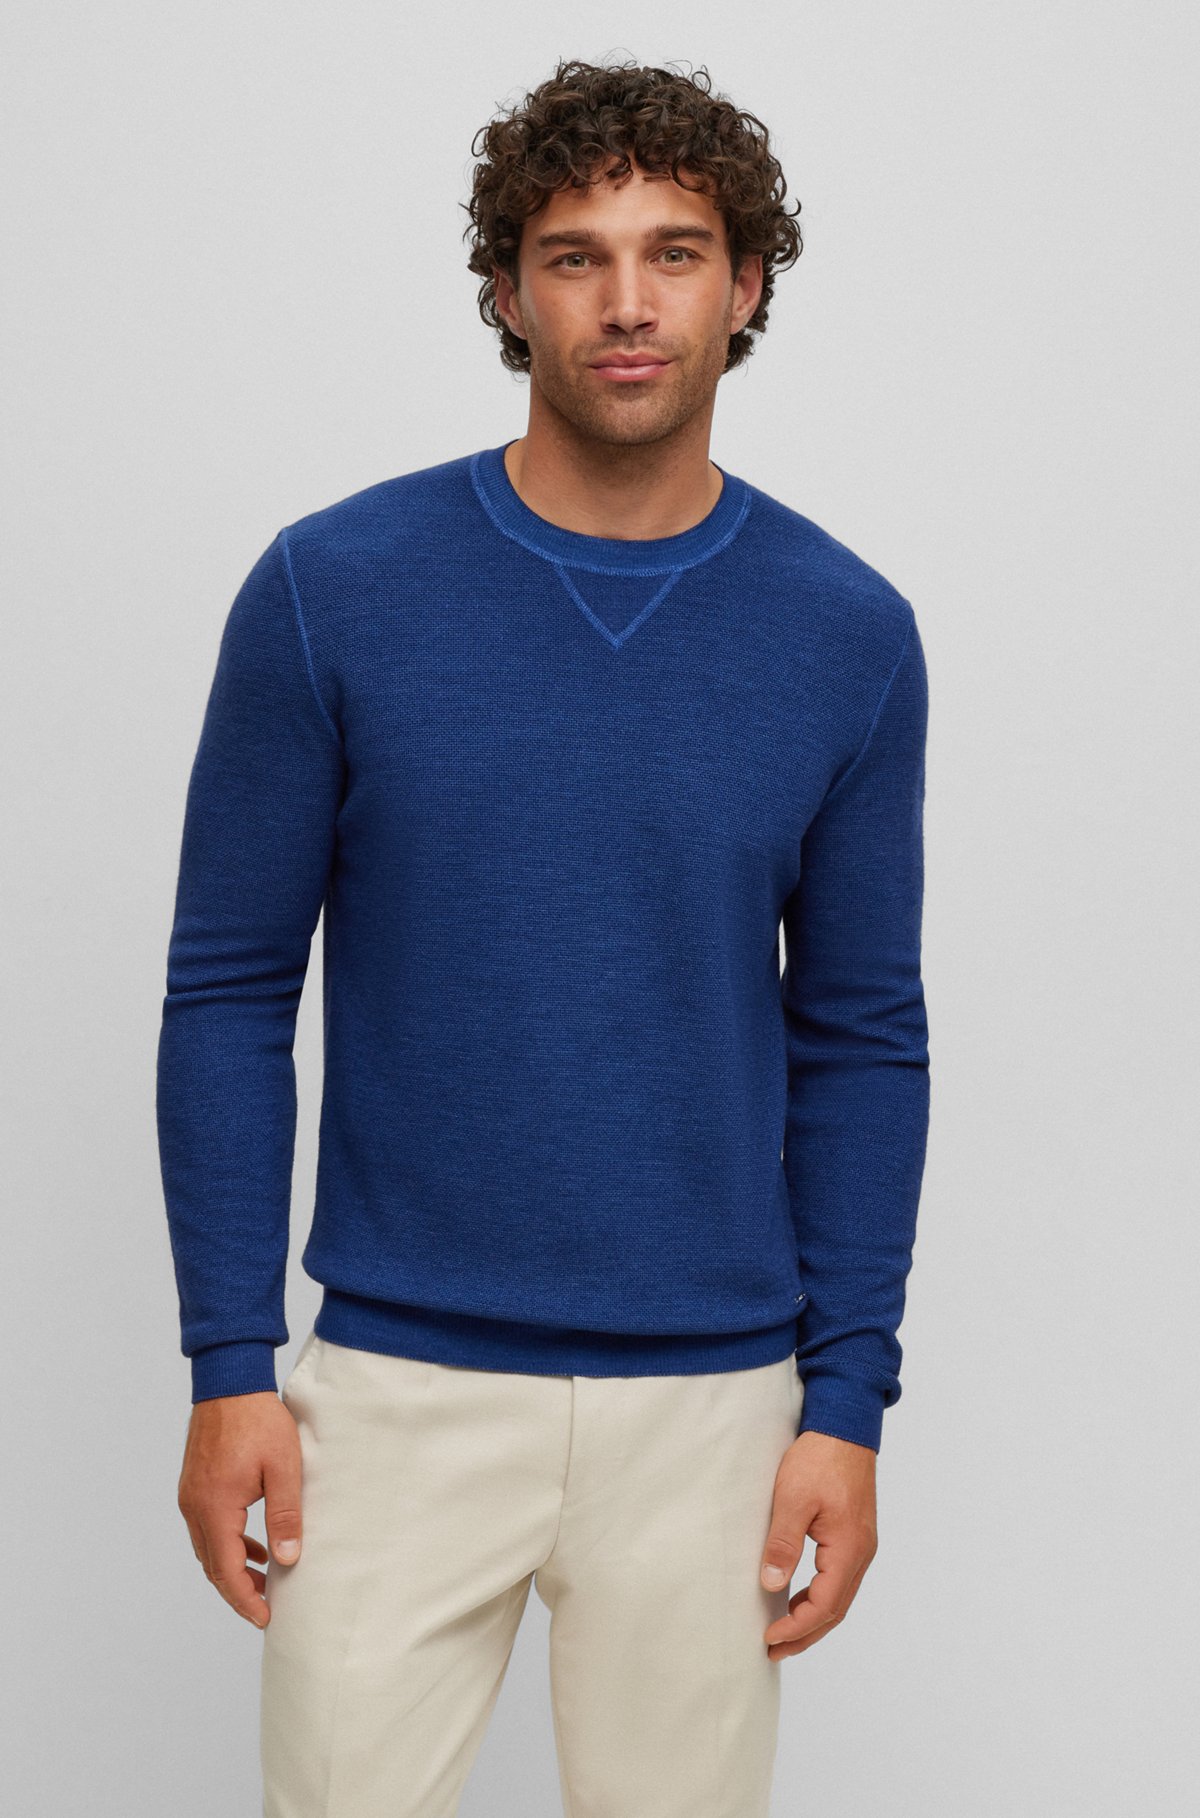 BOSS - Structured-knit sweater in virgin wool, silk and cashmere